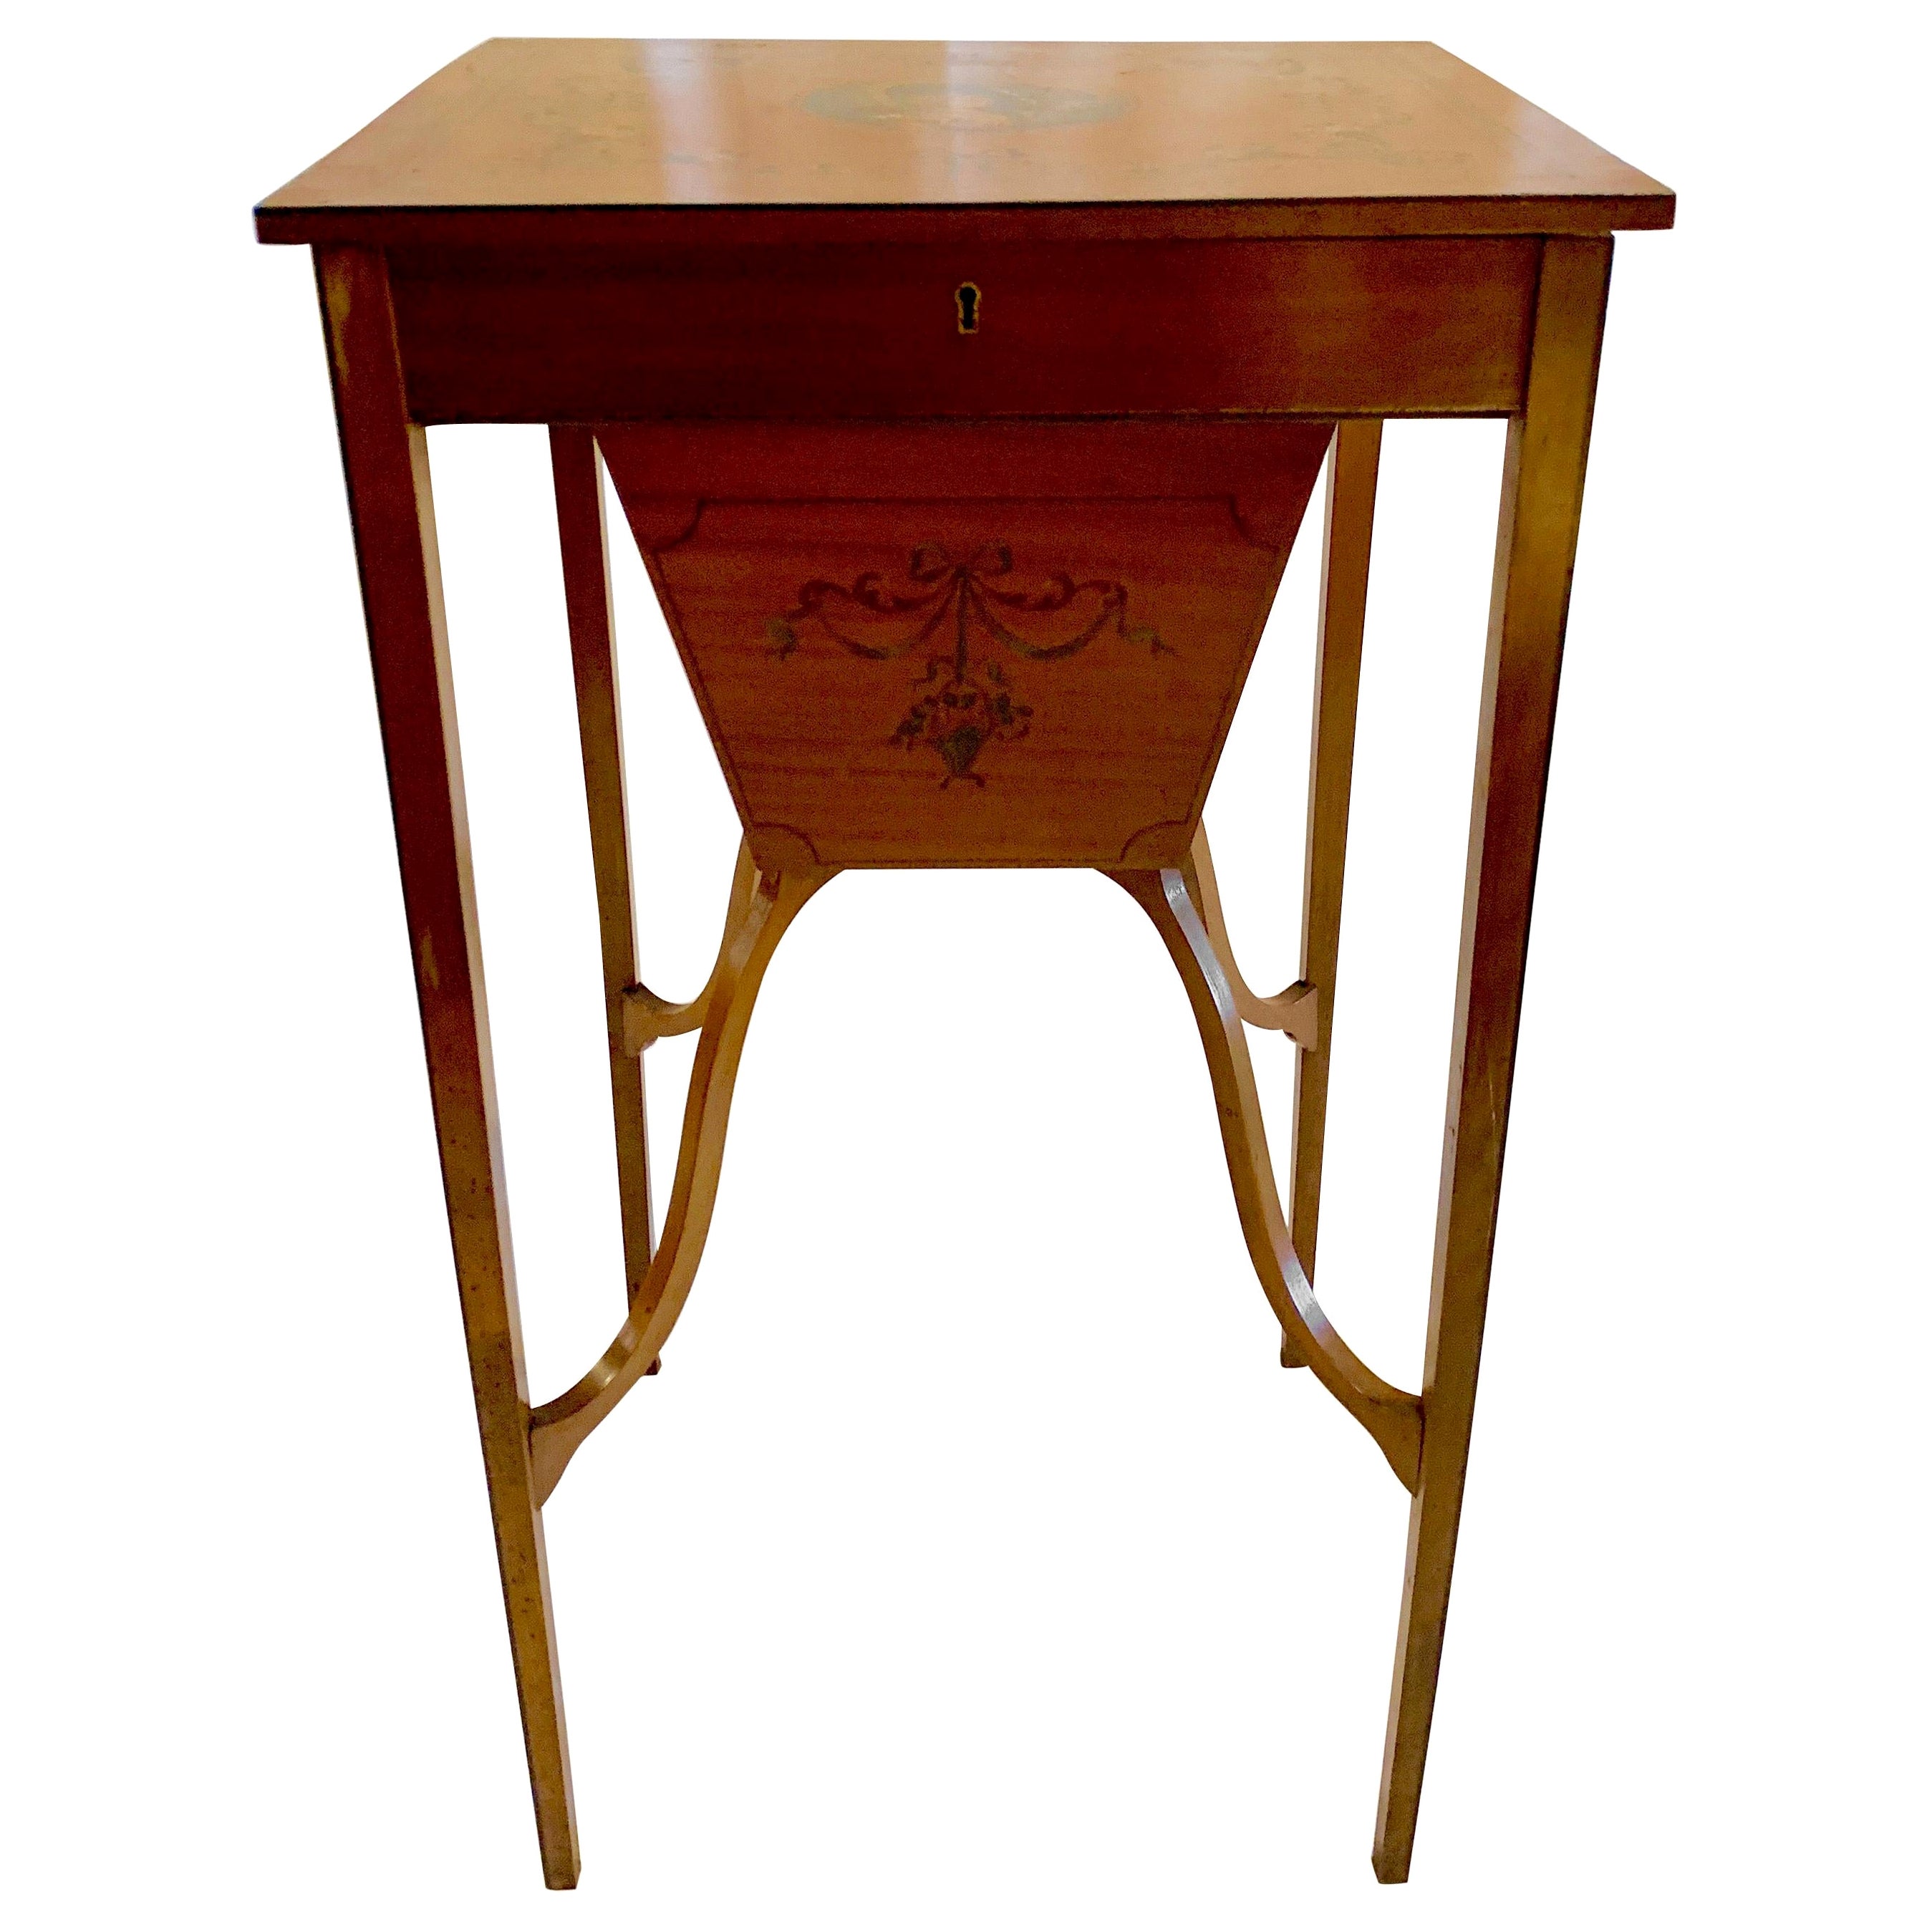 Antique English Satinwood Sewing Table Delicately Painted, circa 1870-1880